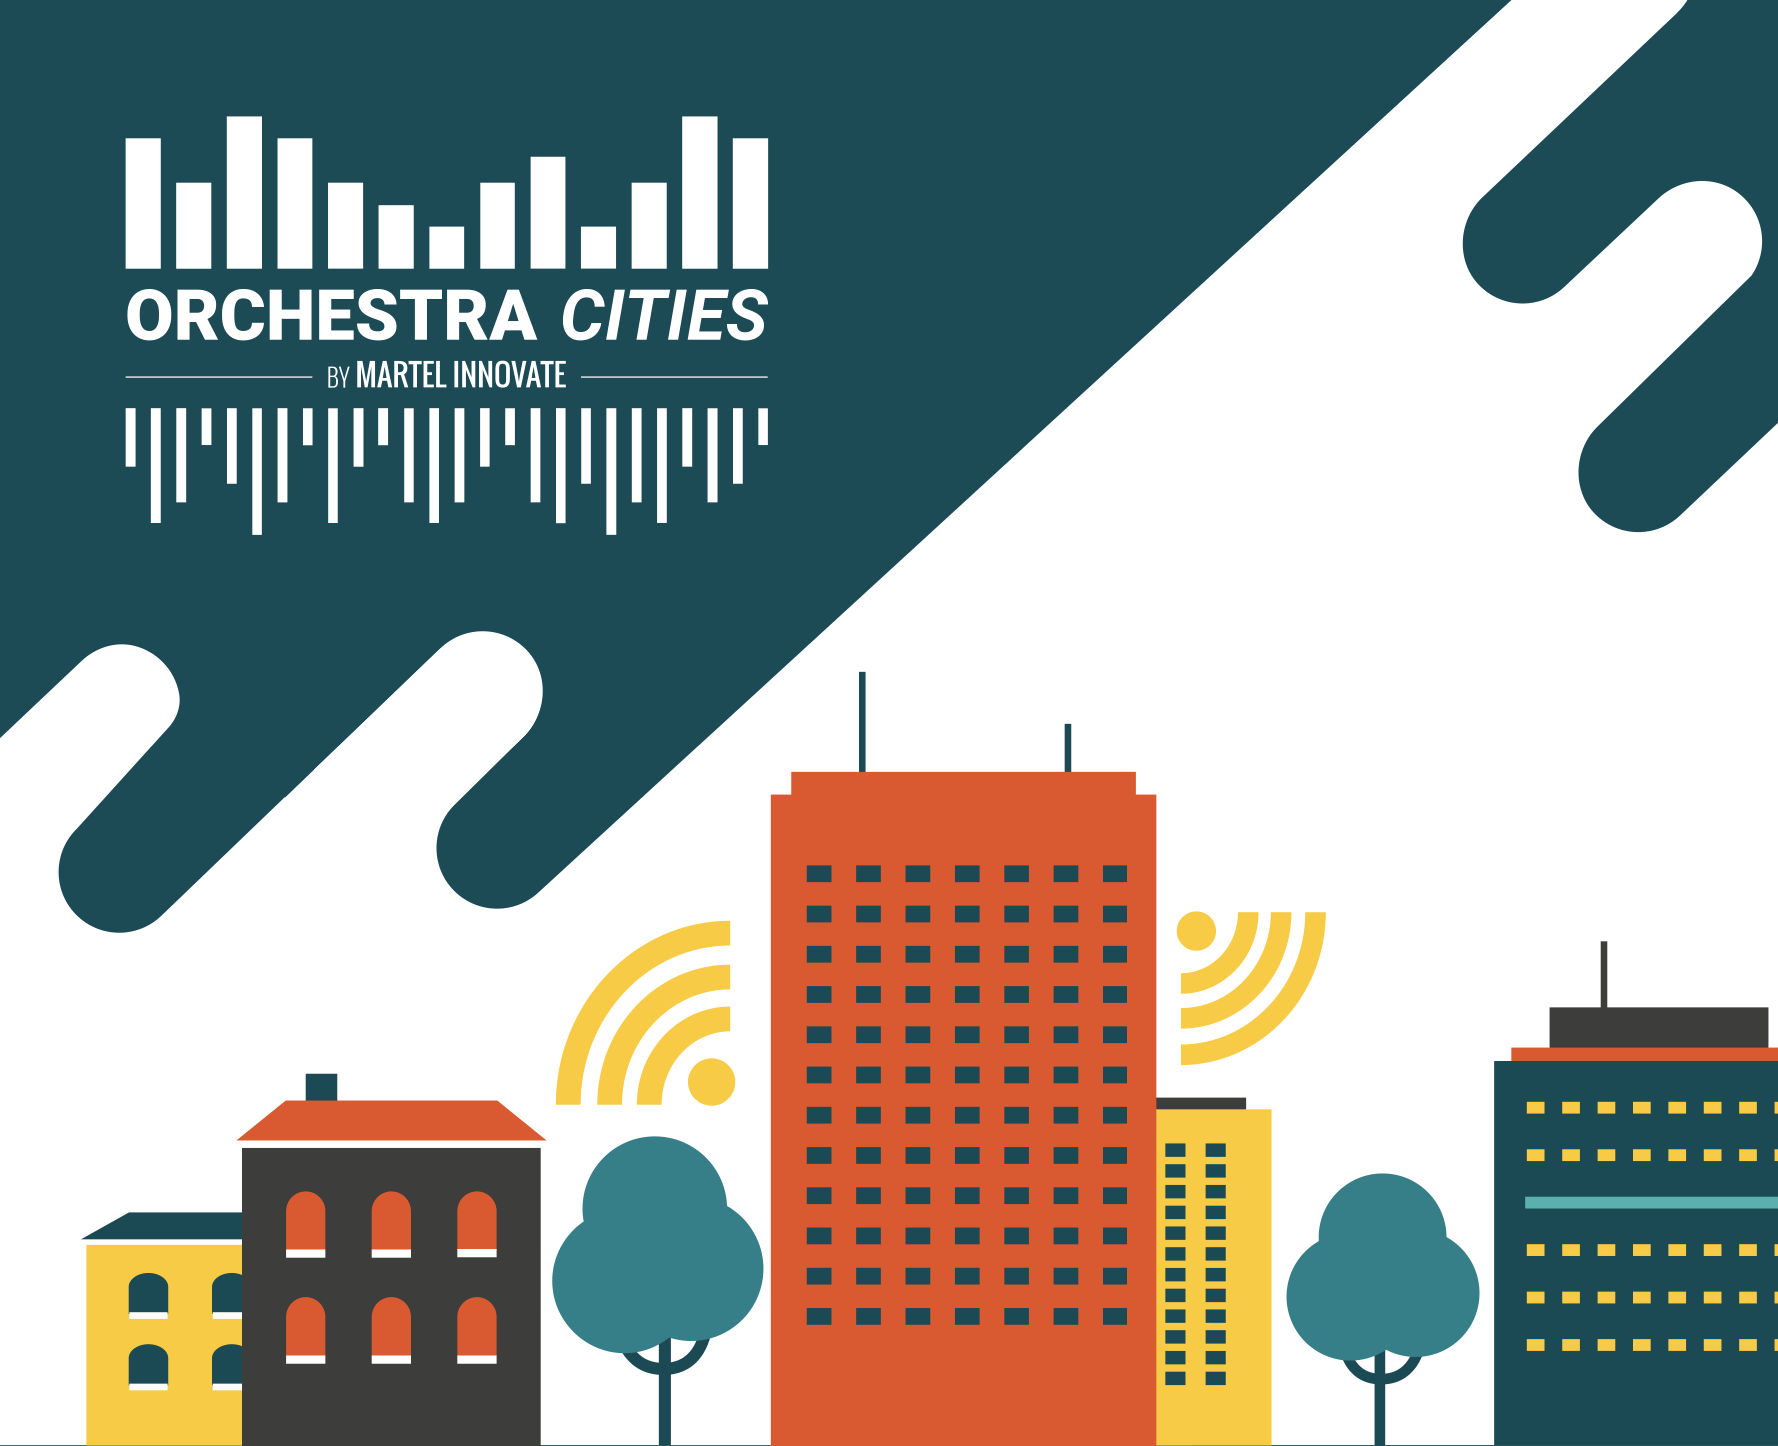 digitally empowered and sustainable smart communities